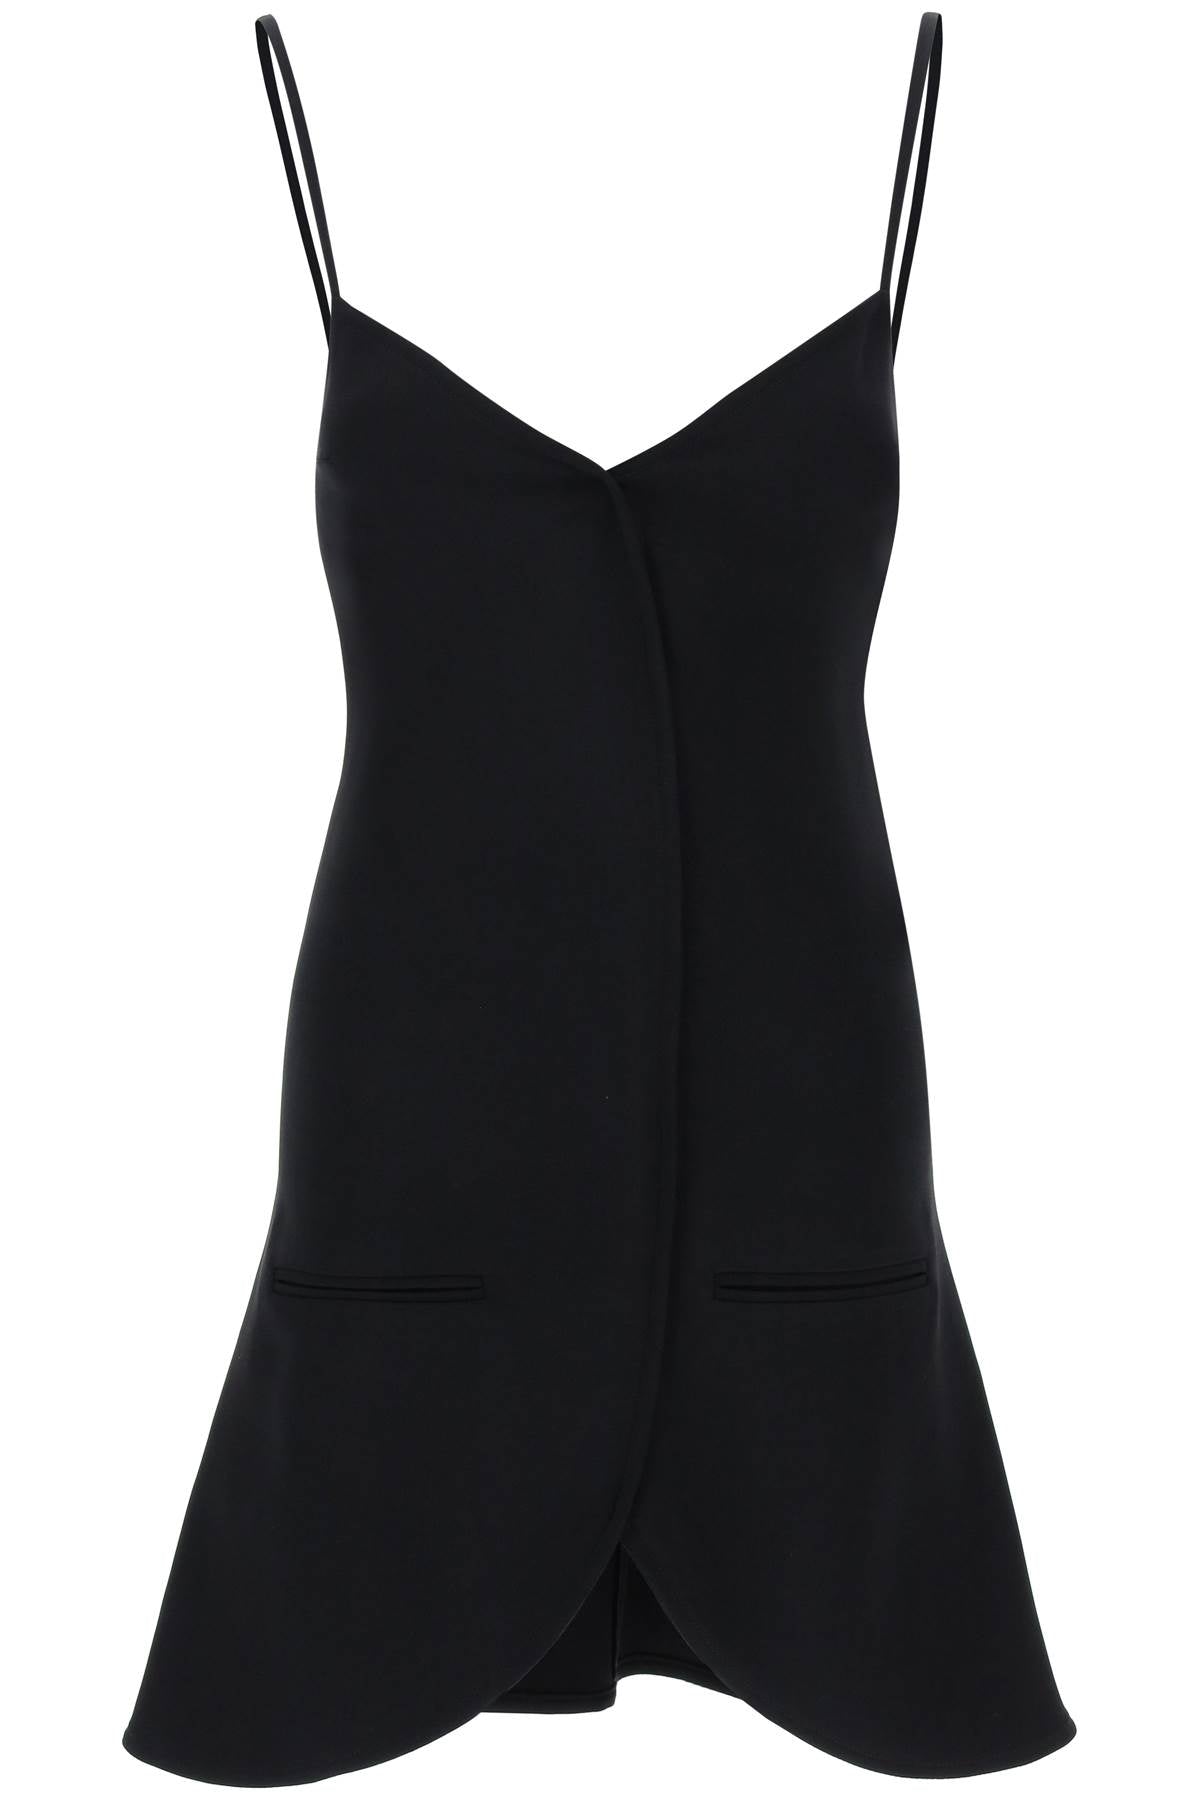 COURREGÈS Flared Black Dress with Layered Front and V-Neckline